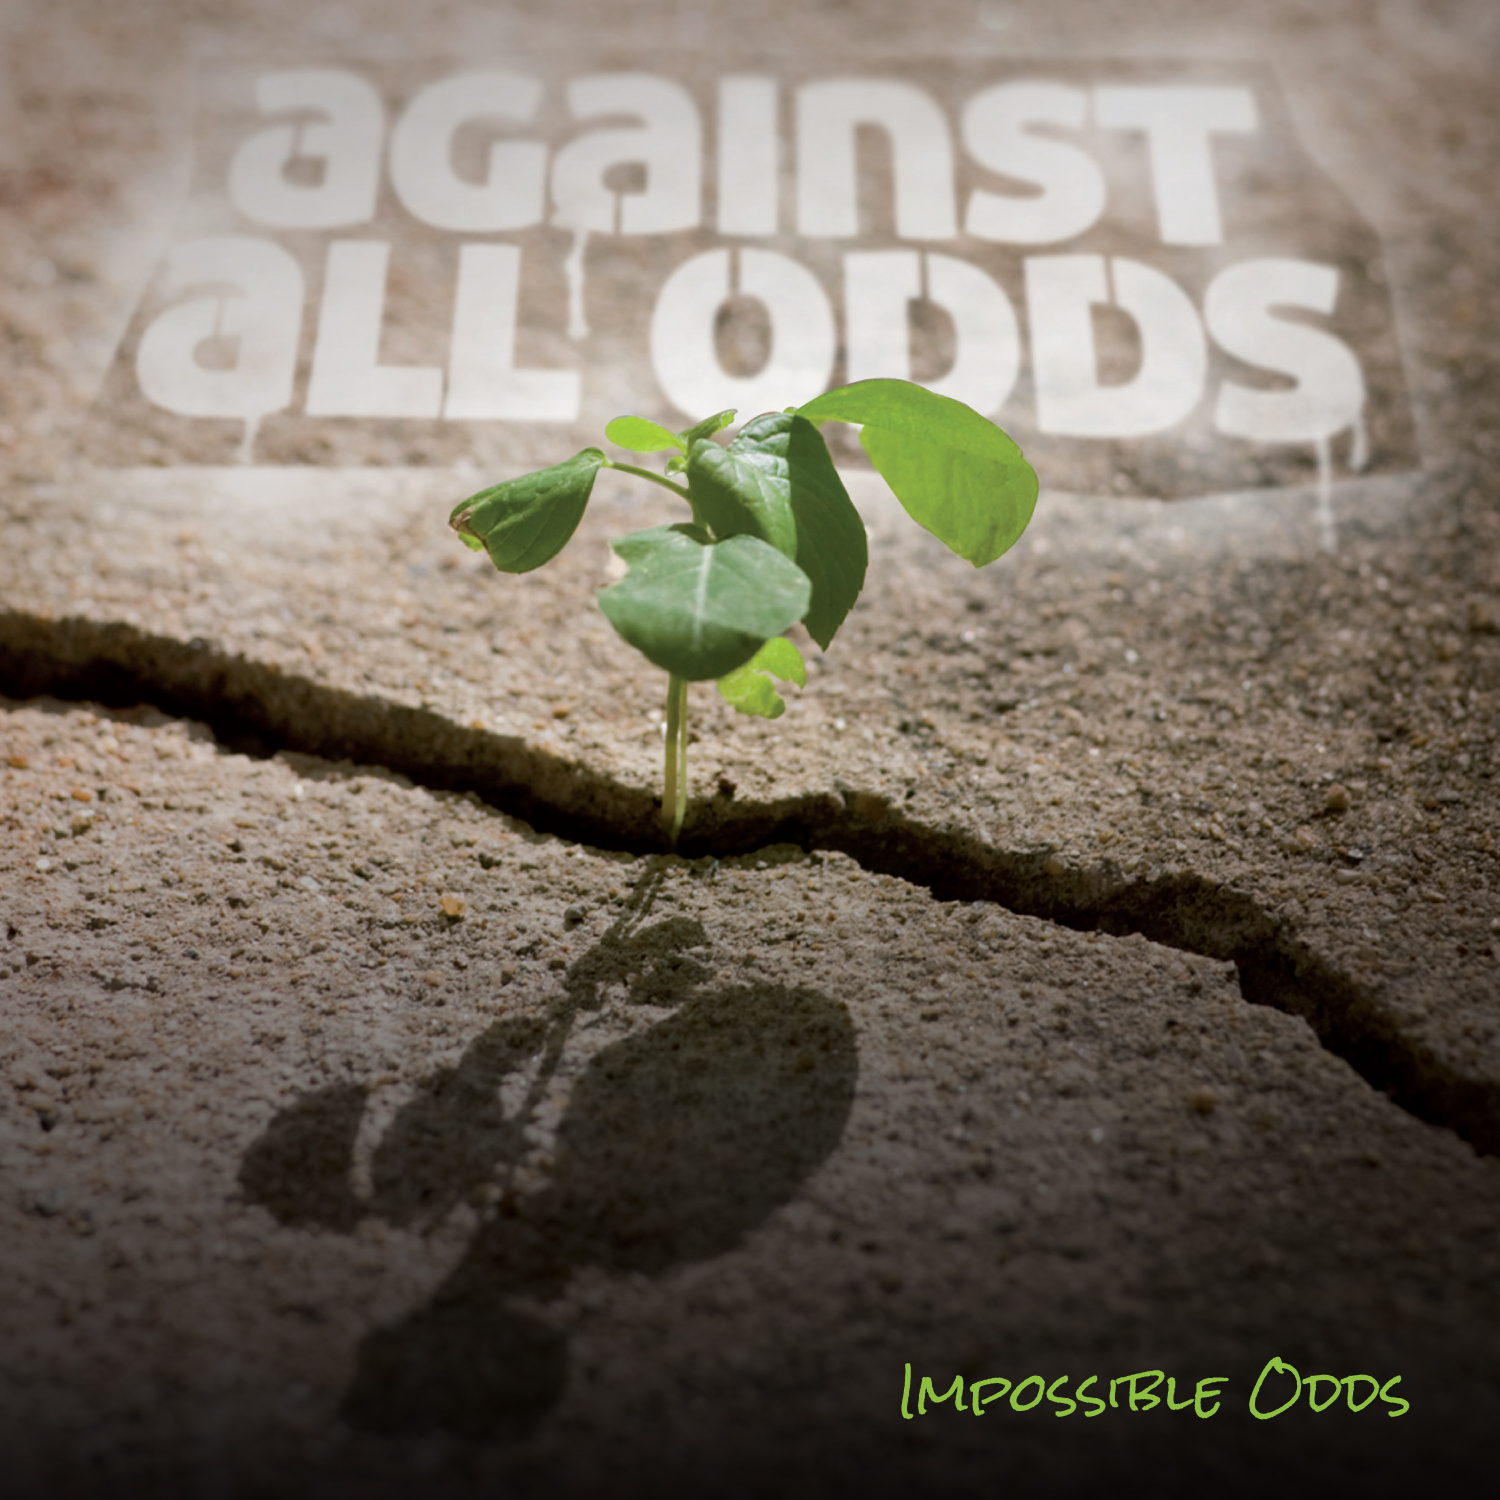 Impossible Odds – Against All Odds – aahh